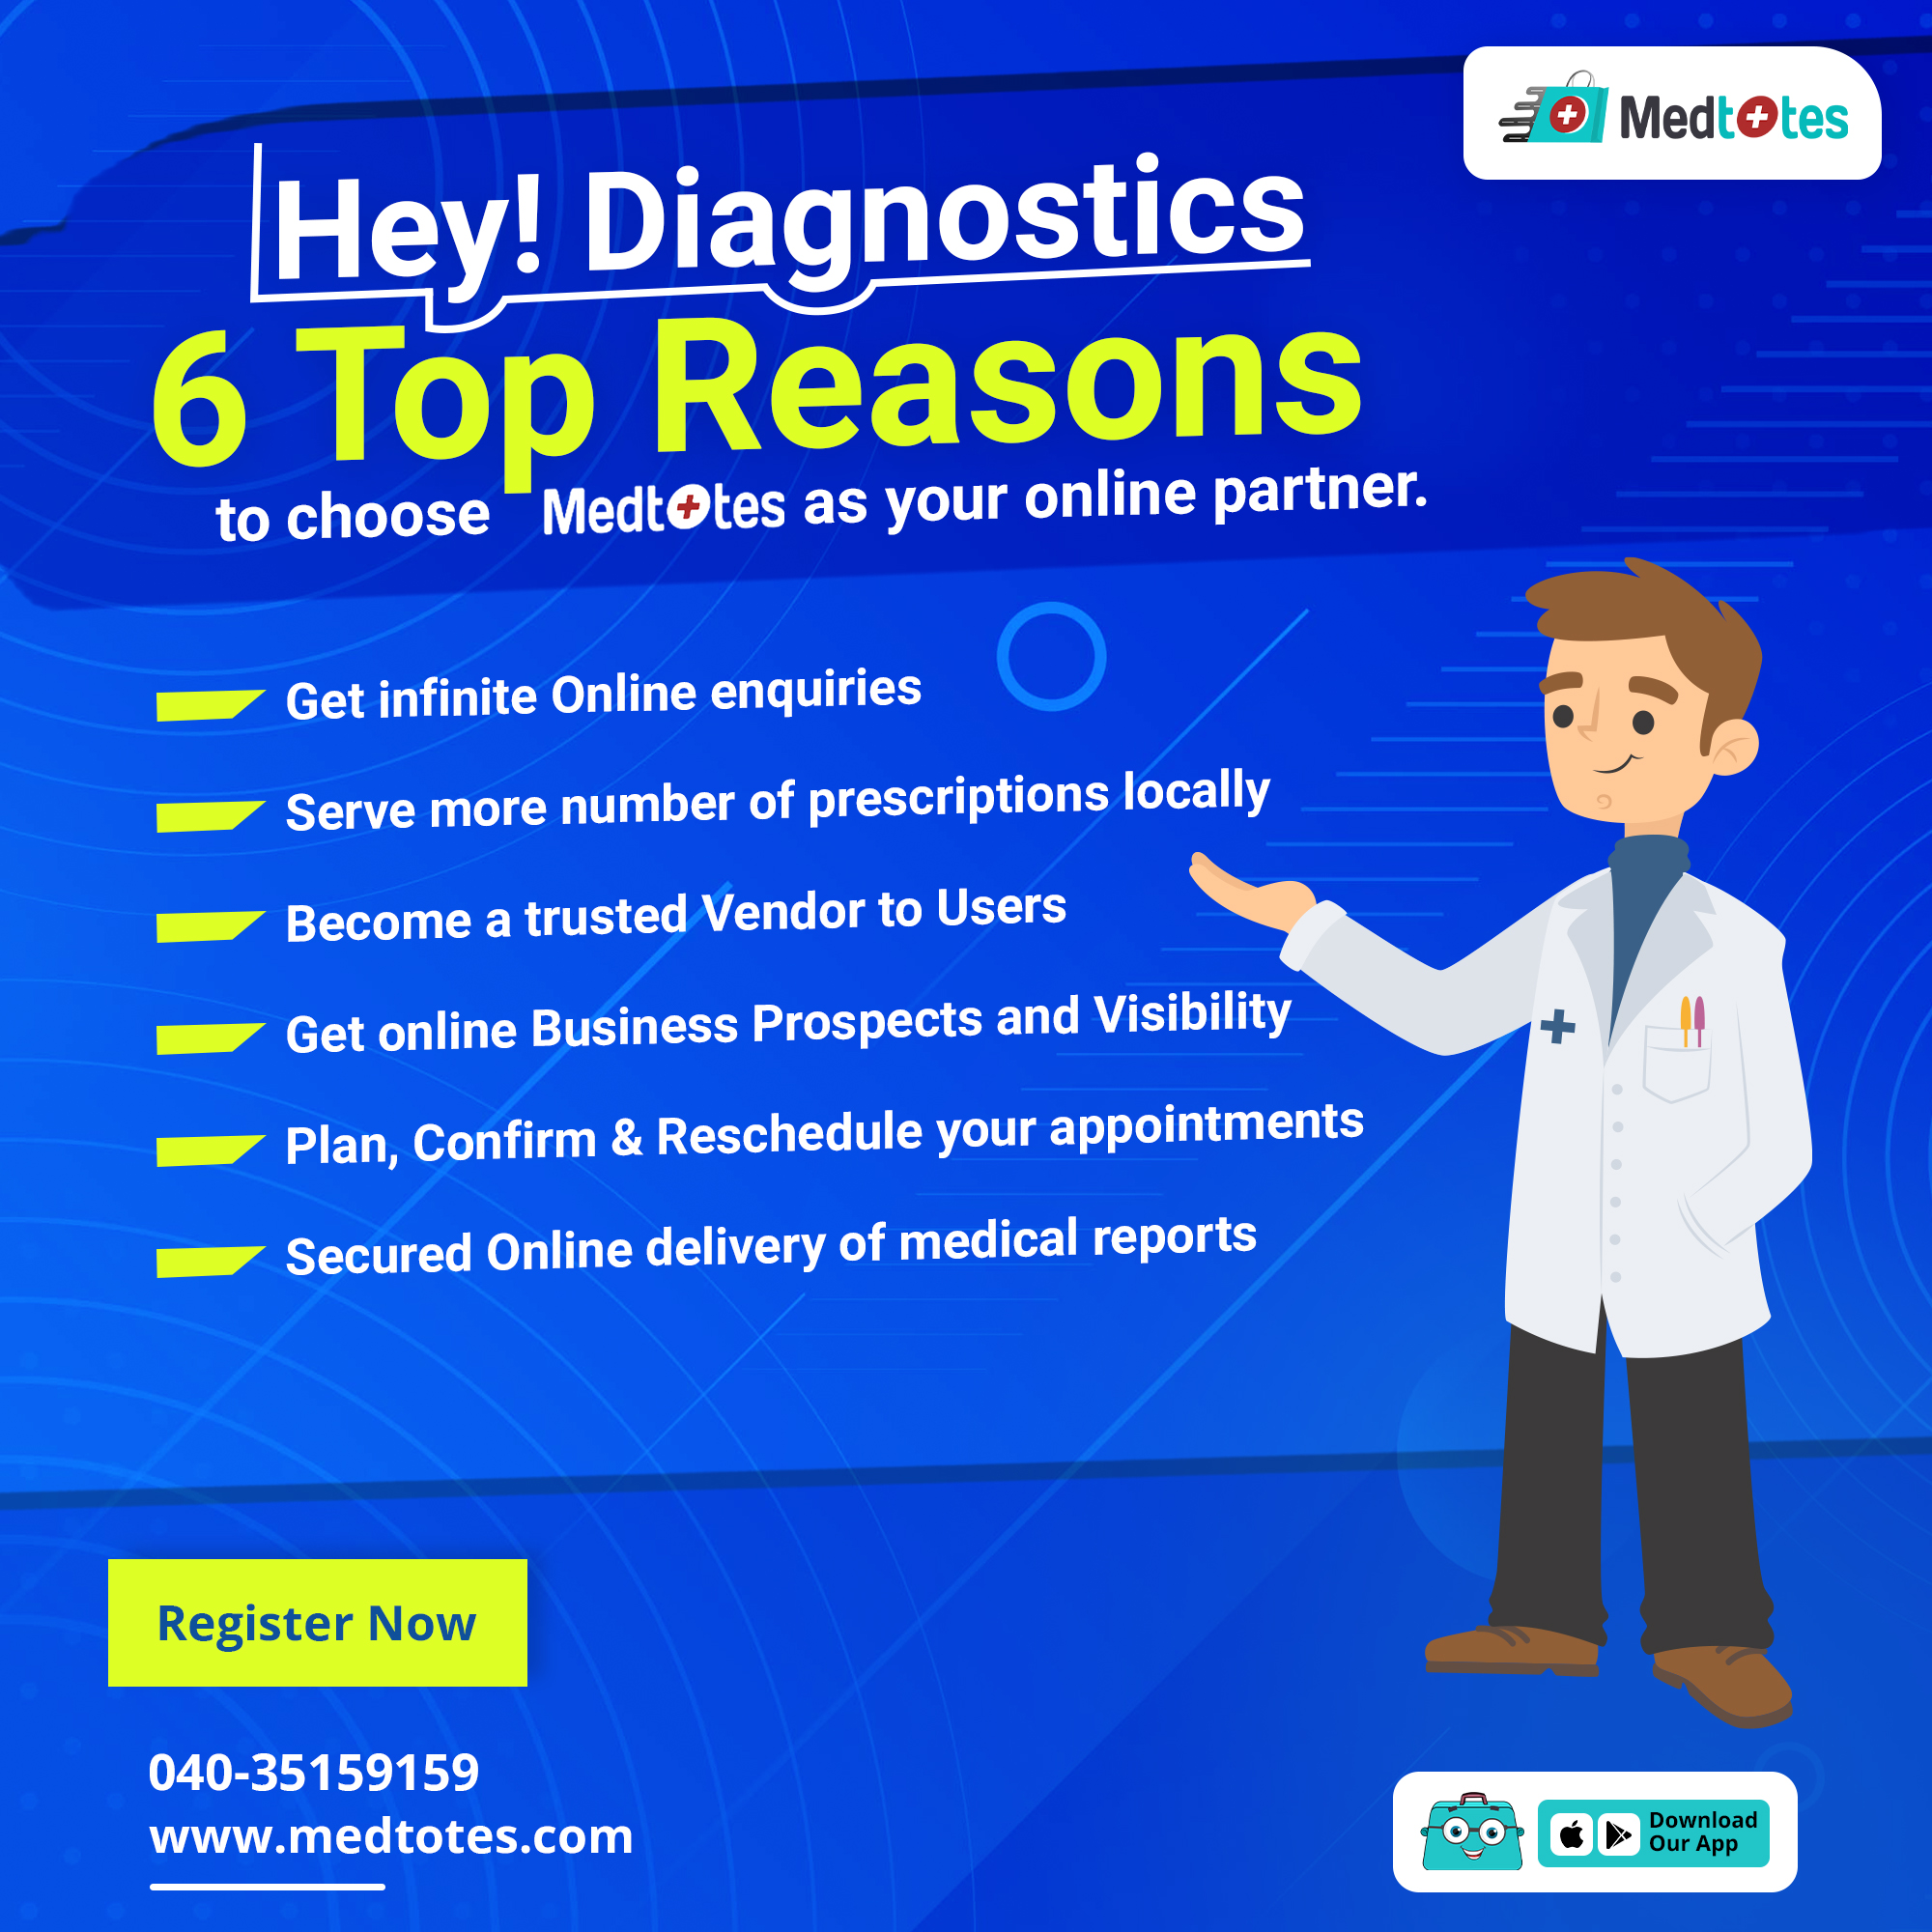 Hey! Diagnostics, Check out the following reasons to understand why you should get register on the most trusted online pharmacy app- Medtotes. Get infinite Online enquiries Serve more number of prescriptions locally Become a trusted Vendor to Users Get online Business Prospects and Visibility Plan, Confirm & Reschedule your appointments Secured Online delivery of medical reports Download our app: For Users: Android: https://buff.ly/3nm4VNm iOS: https://buff.ly/3GkDD1c For Pharmacy: Android: https://buff.ly/3qptbAc For Diagnostics: Android: https://buff.ly/3I1HoZT If you have any issues, please contact: 040 35159159 or drop us an email to support@medtotes.com